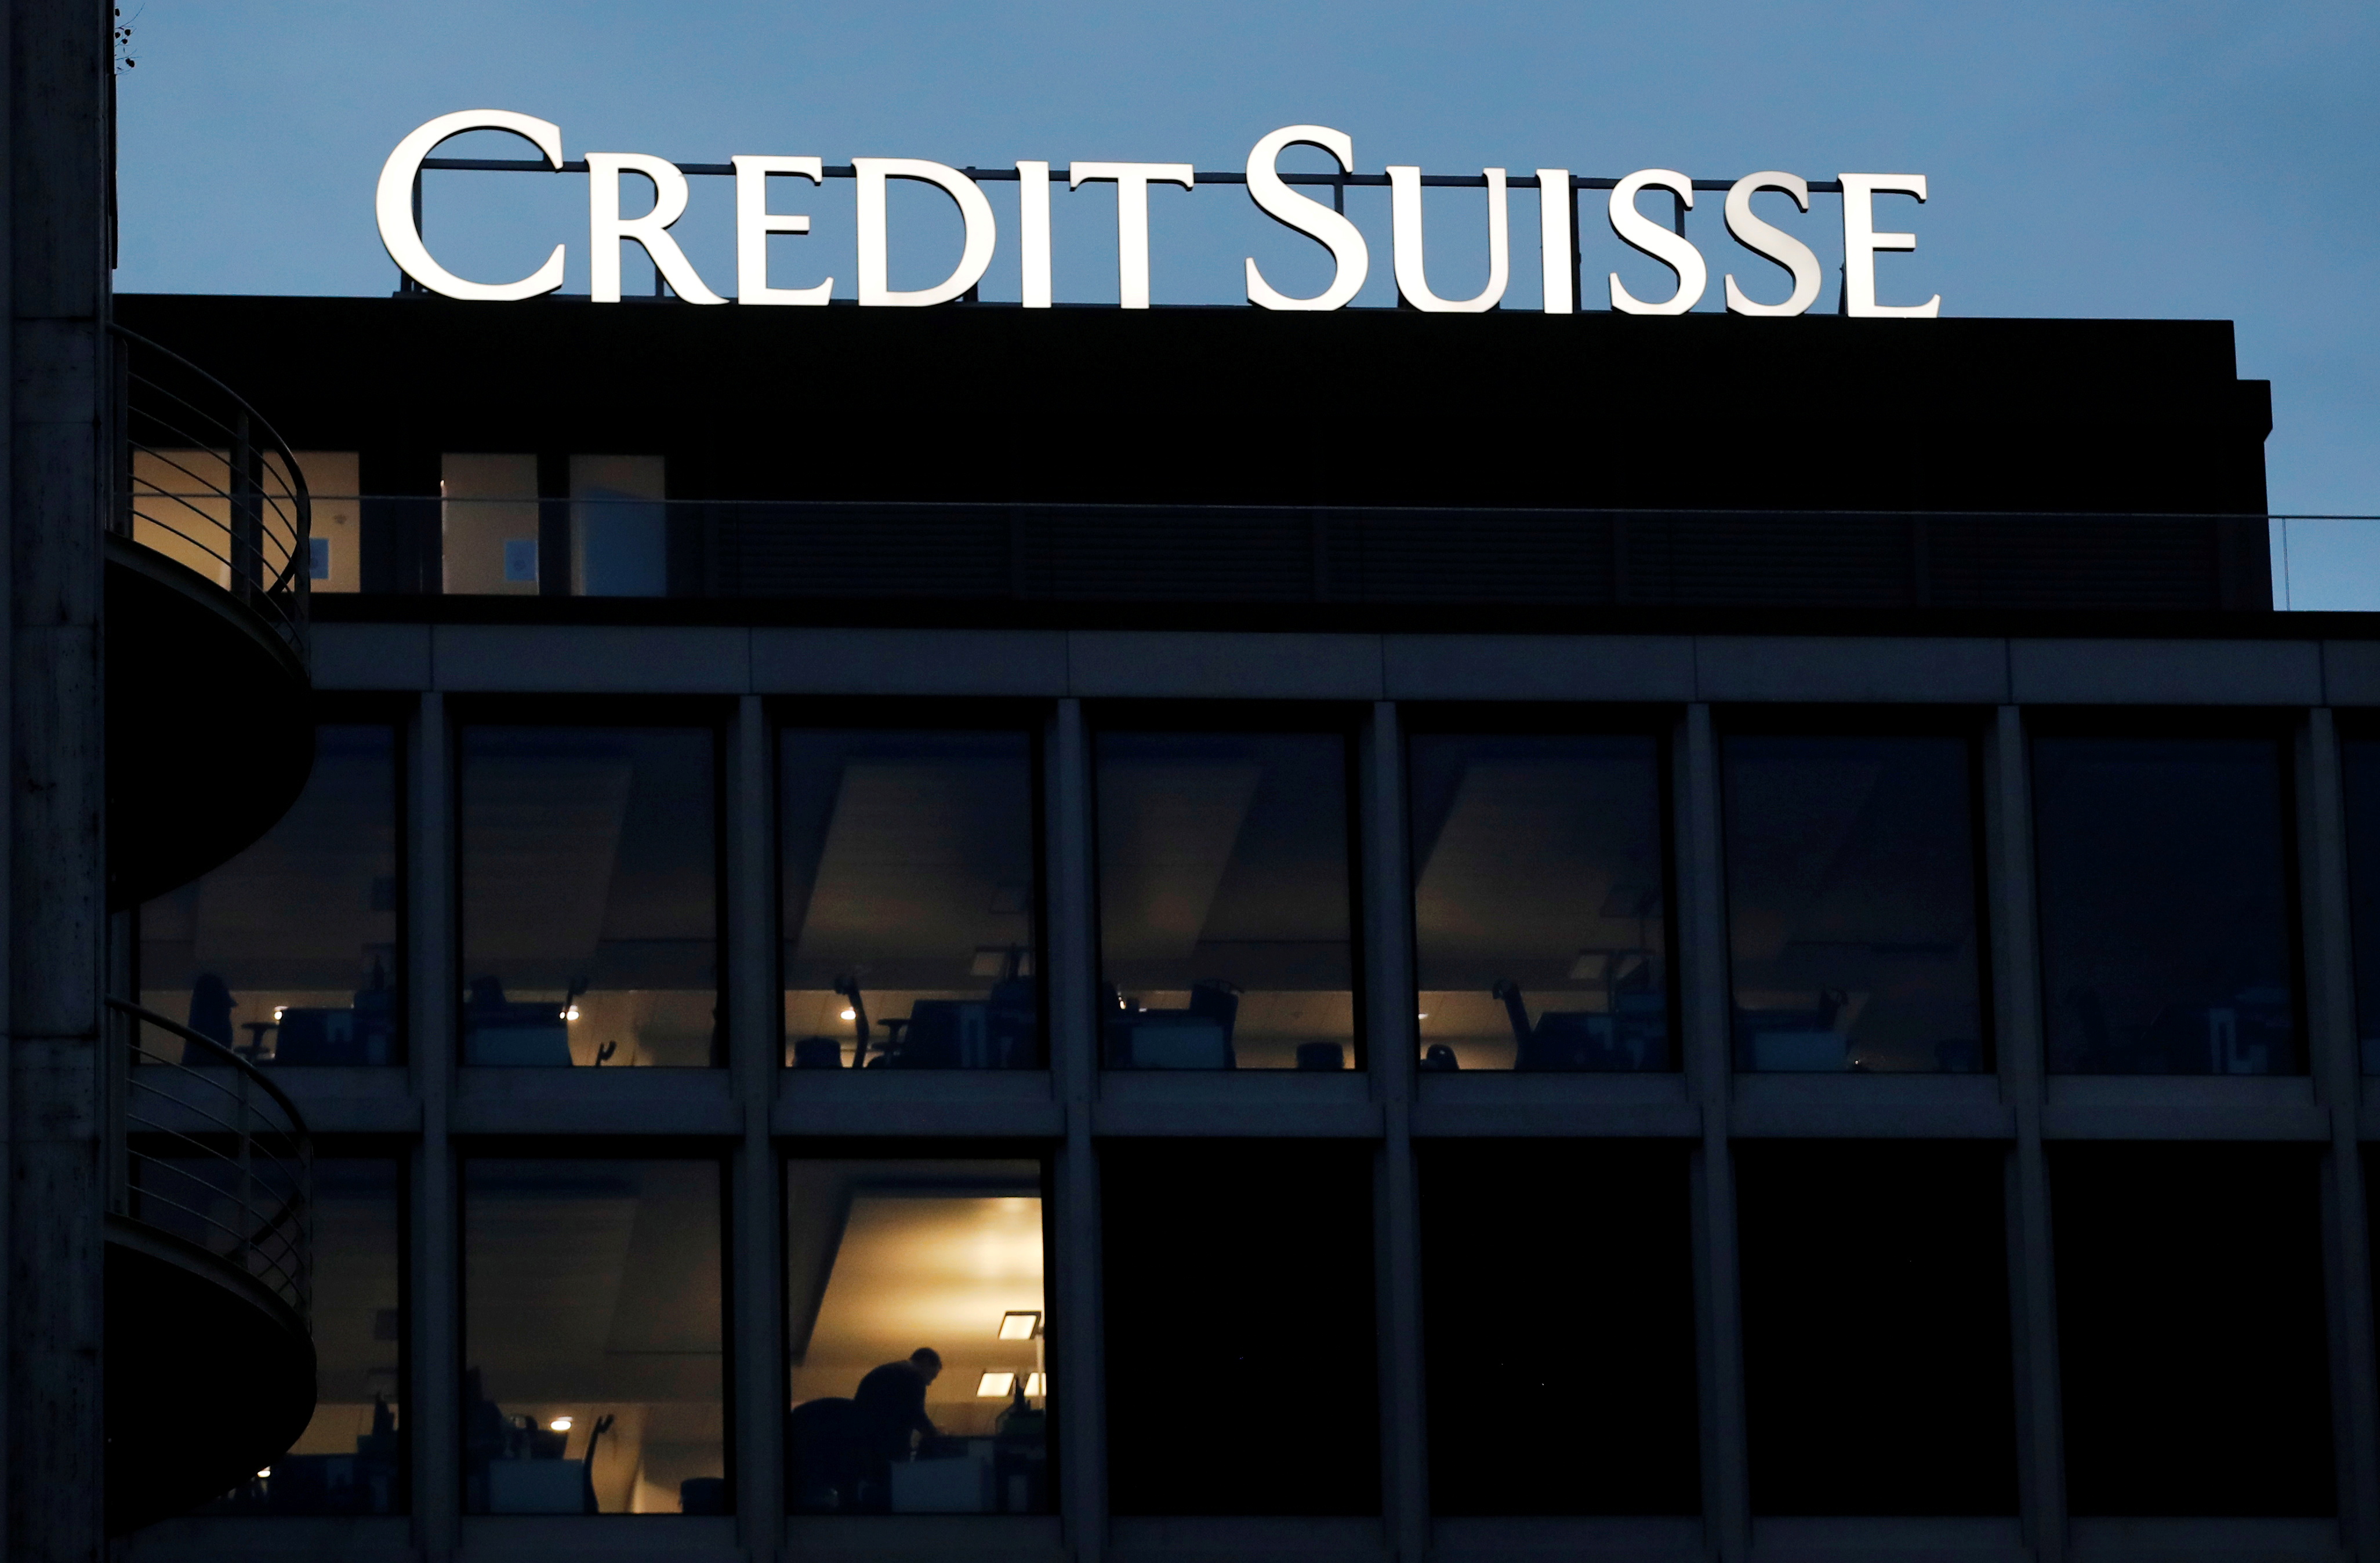 A logo of Credit Suisse is pictured on a building in Geneva